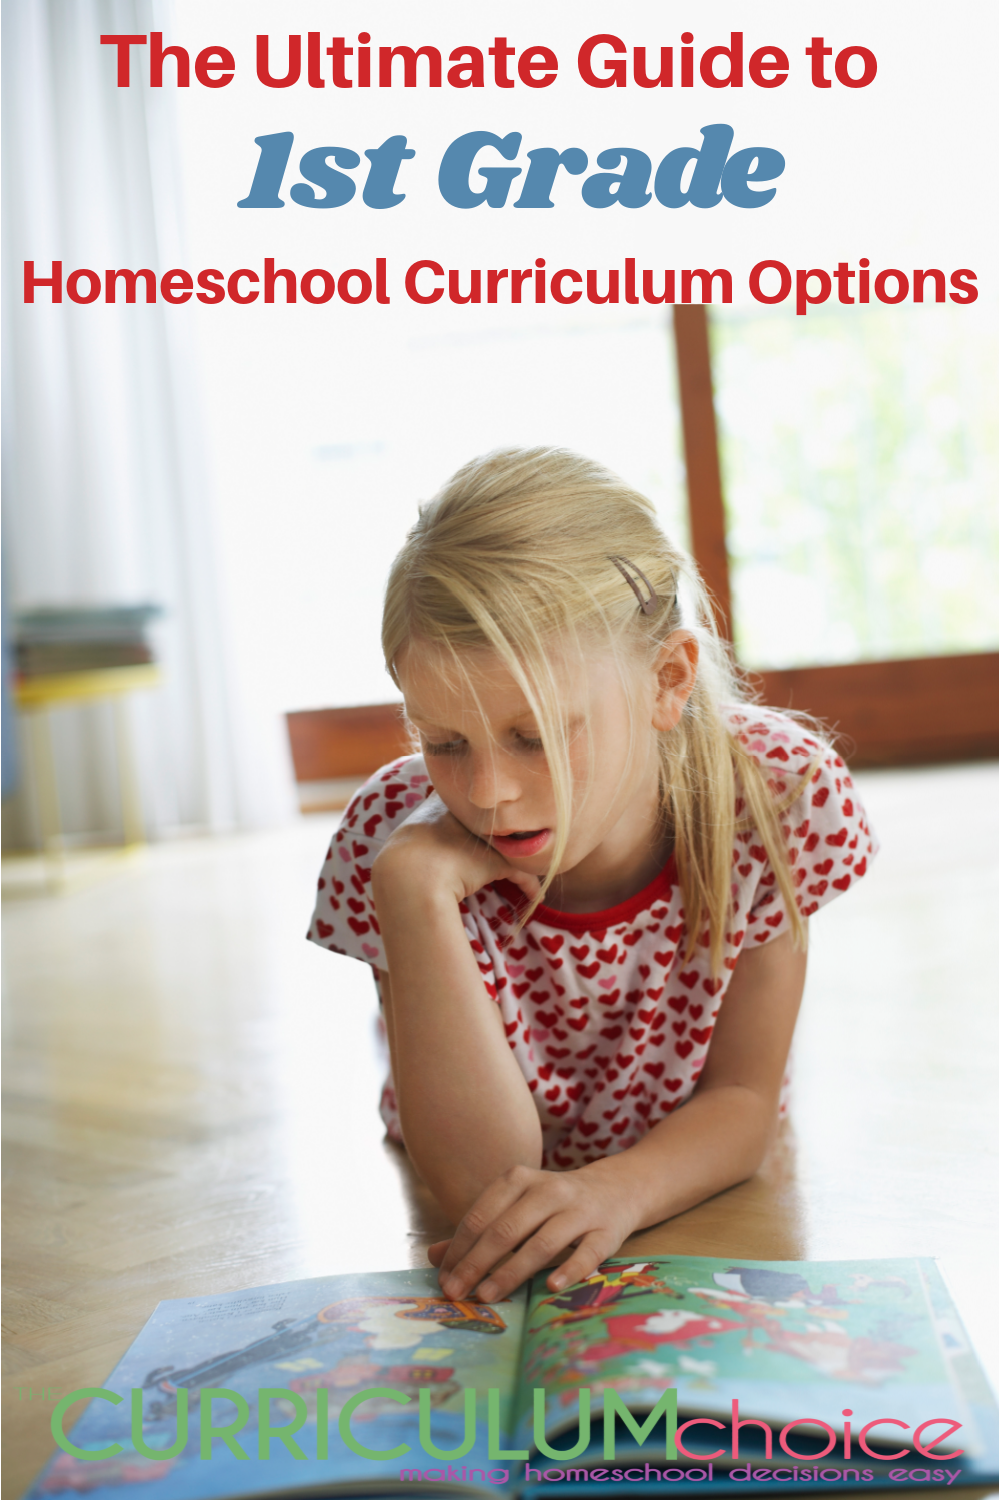 This Ultimate Guide to 1st Grade Homeschool Curriculum Options includes ideas for full curriculum, math, English, science, history/geography and extras! From The Curriculum Choice